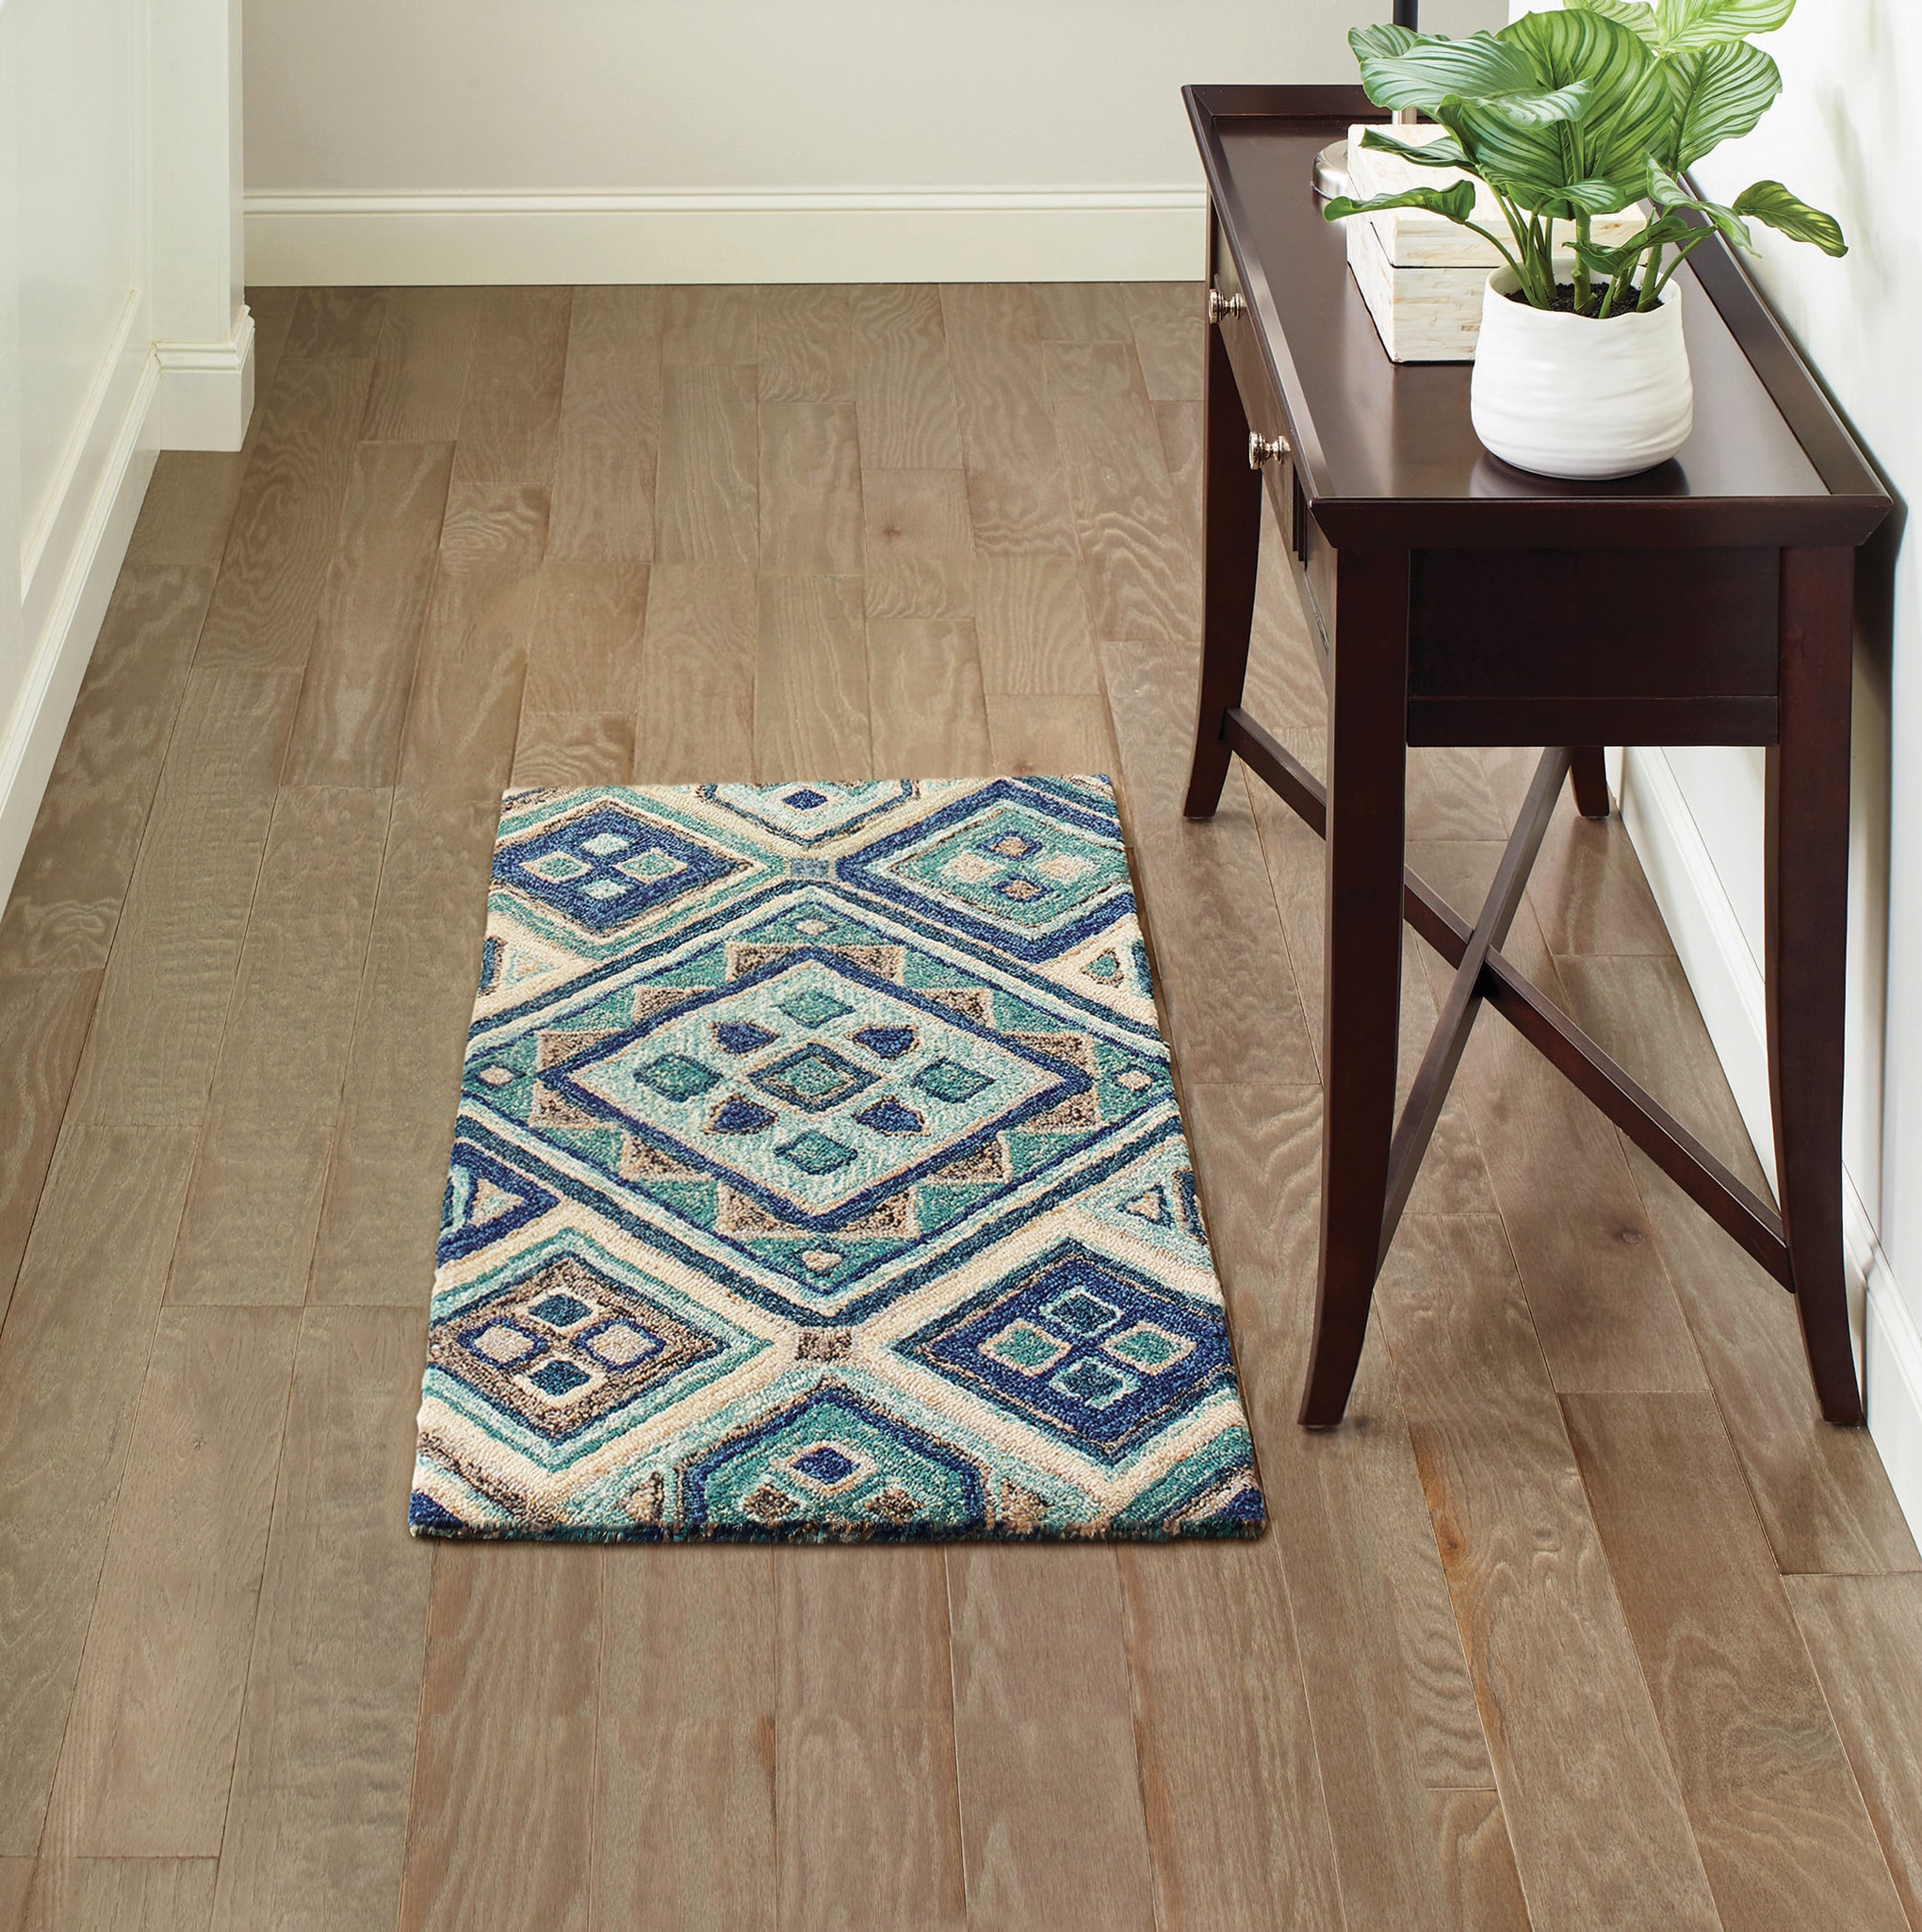 Teal Tiles 2 x 3 Teal Indoor/Outdoor Geometric Throw Rug in Blue | - allen + roth with STAINMASTER 26733